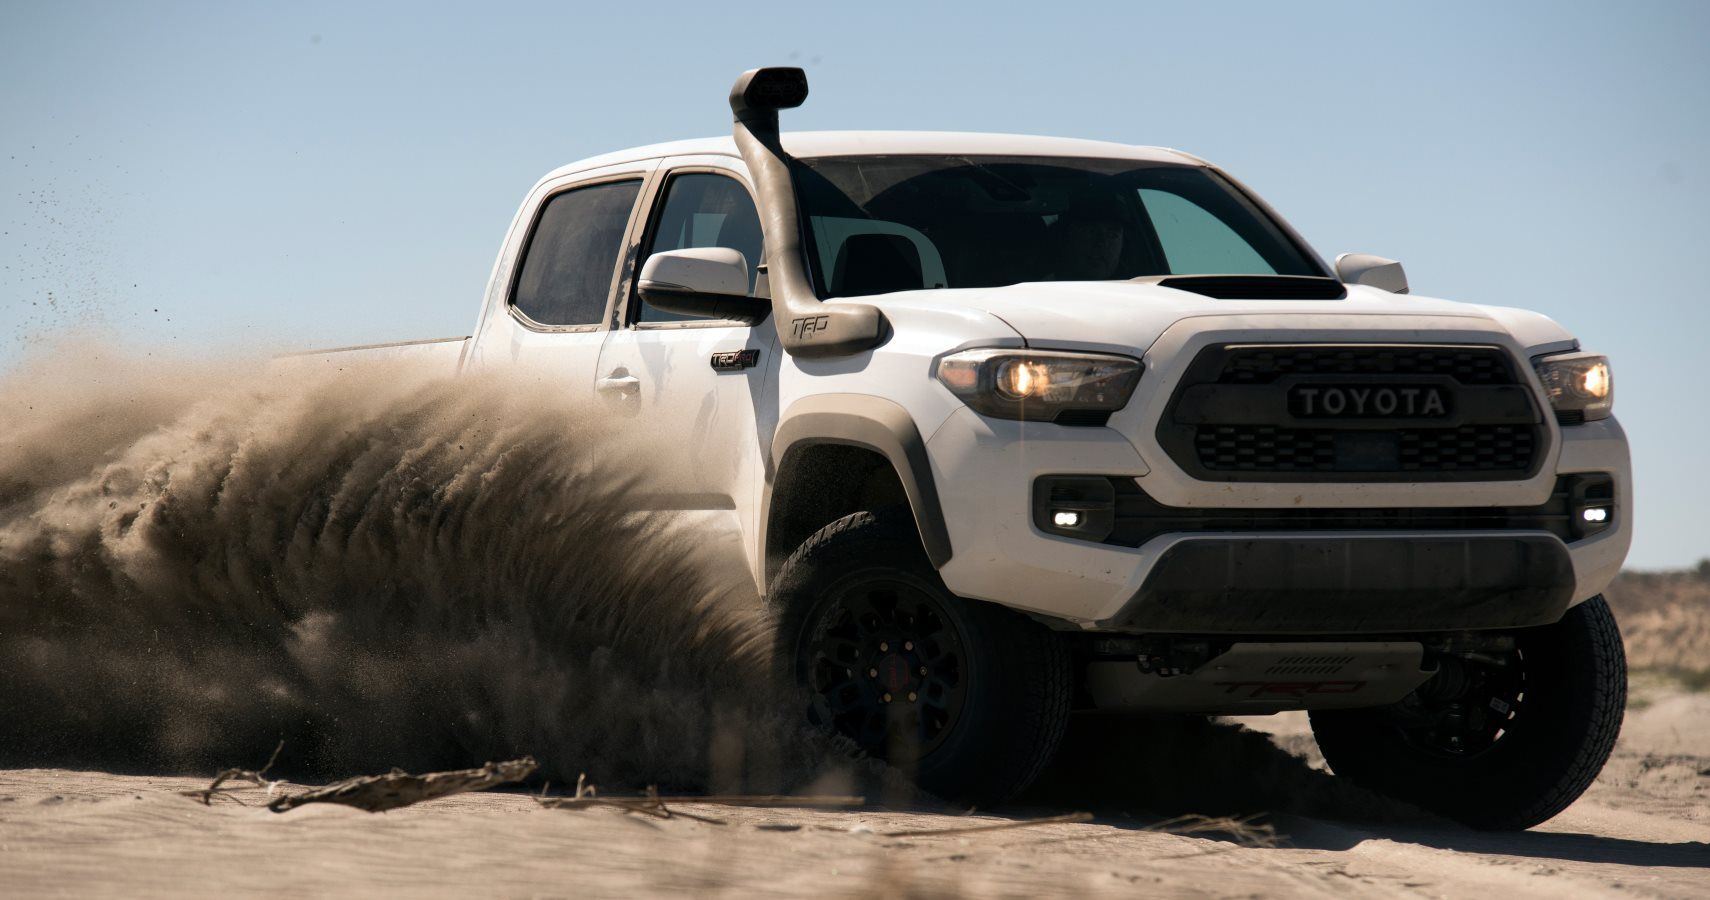 The 2019 Toyota Tacoma TRD Pro drives over sand dunes